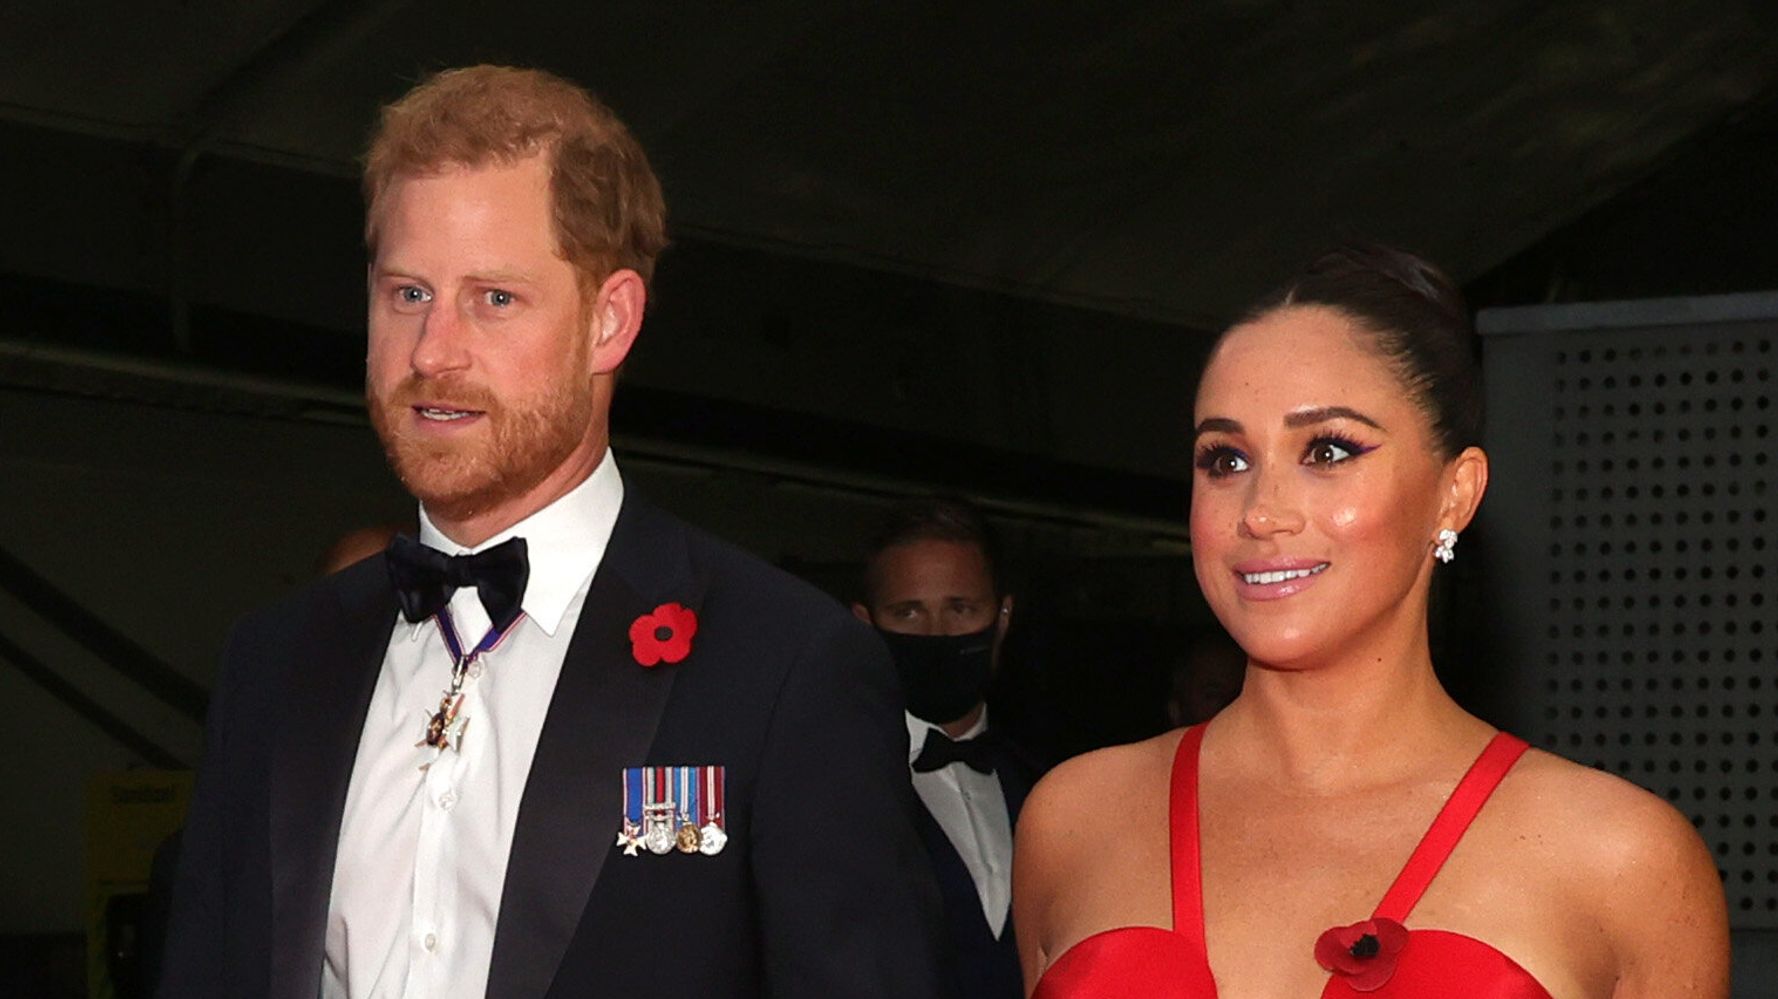 Prince Harry Talks About ‘Invisible Wounds’ That Exist ‘In The Darkness’ At NYC Military Gala – HuffPost